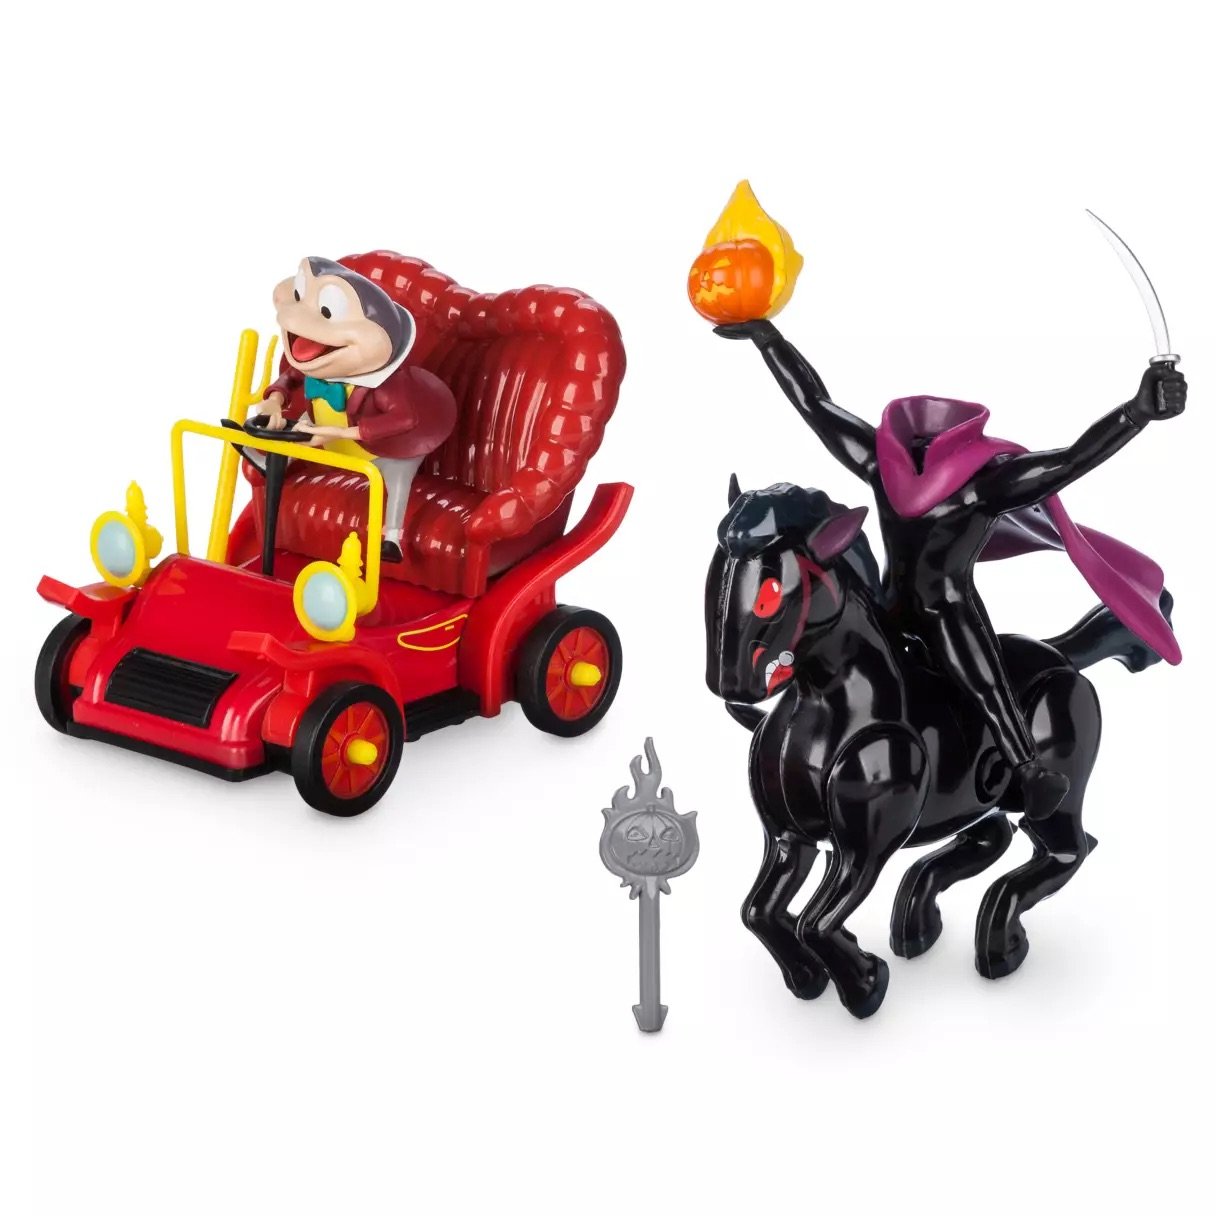 Mr. Toad and Headless Horseman Toy Set